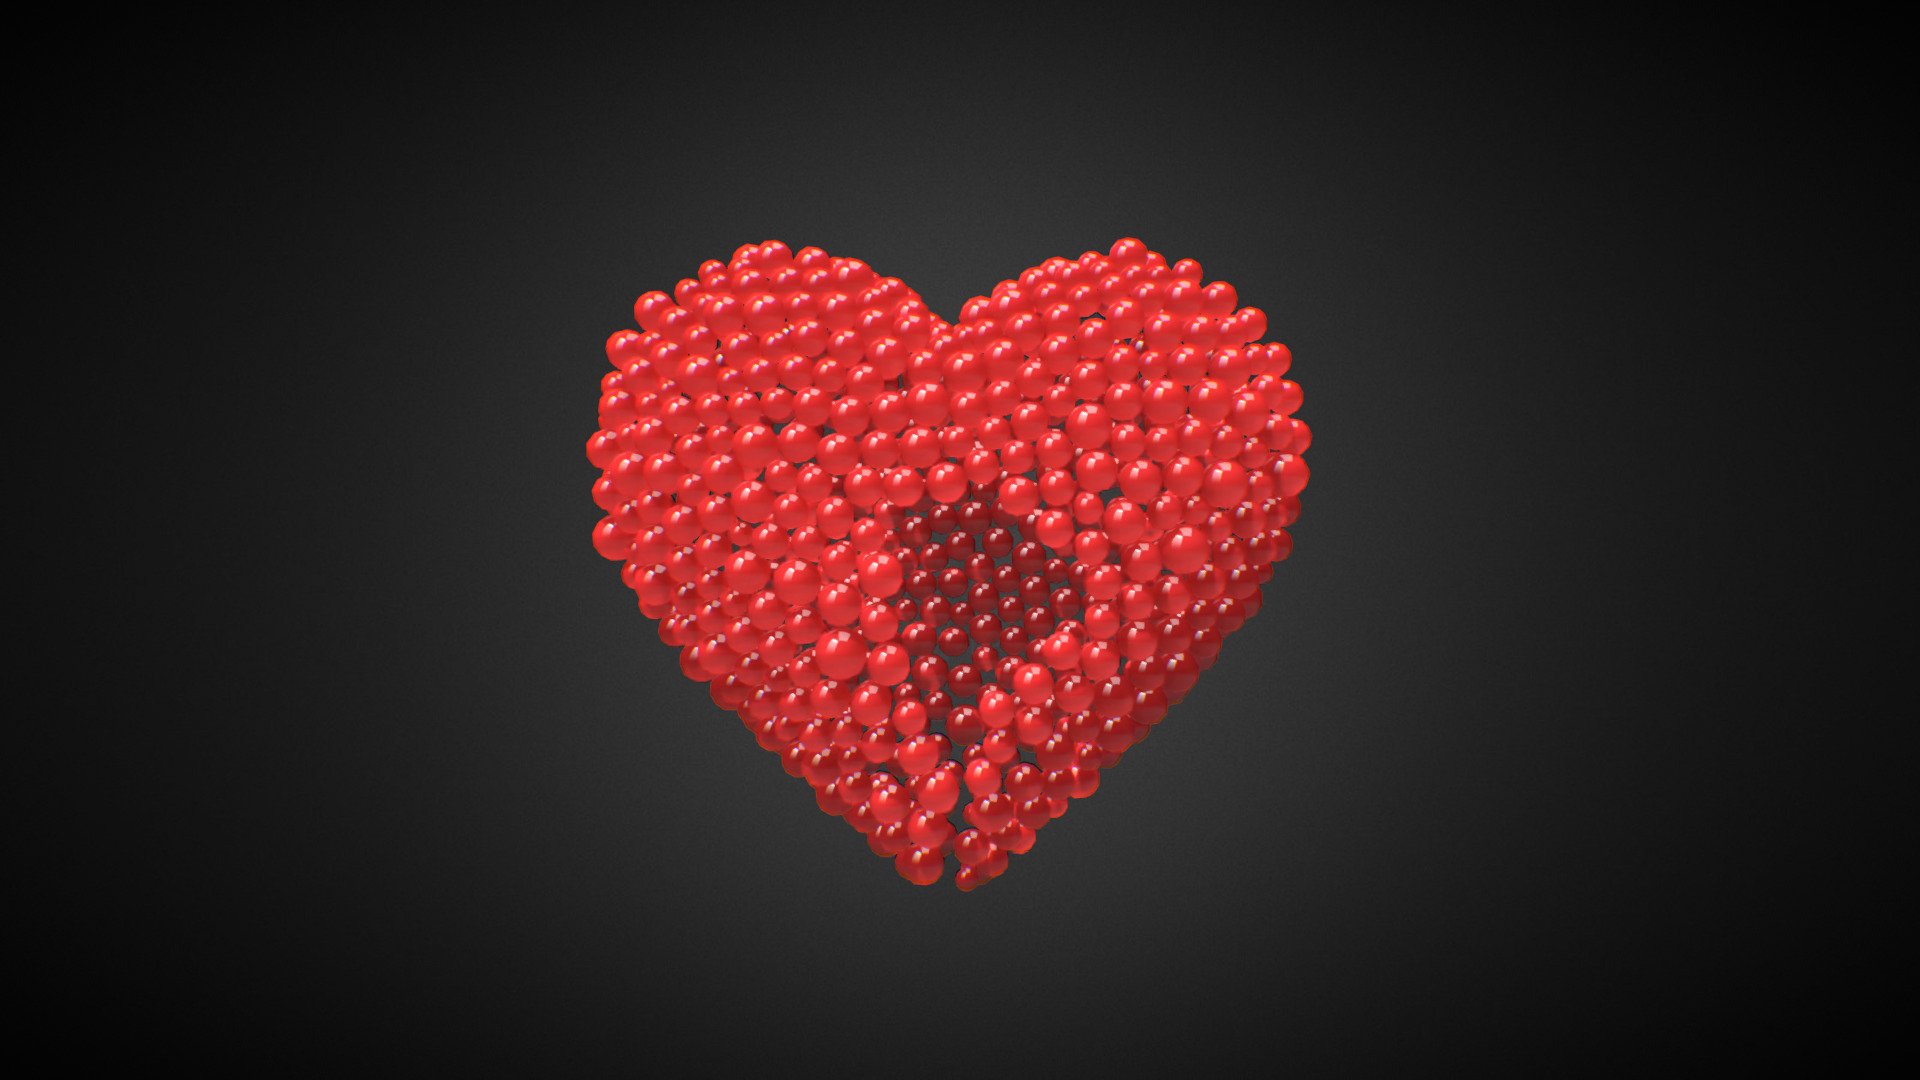 Animated spheres forming beating heart shape made in Houdini. Stored as keyframed transforms via fbx.
Suitable for rendering 3d model